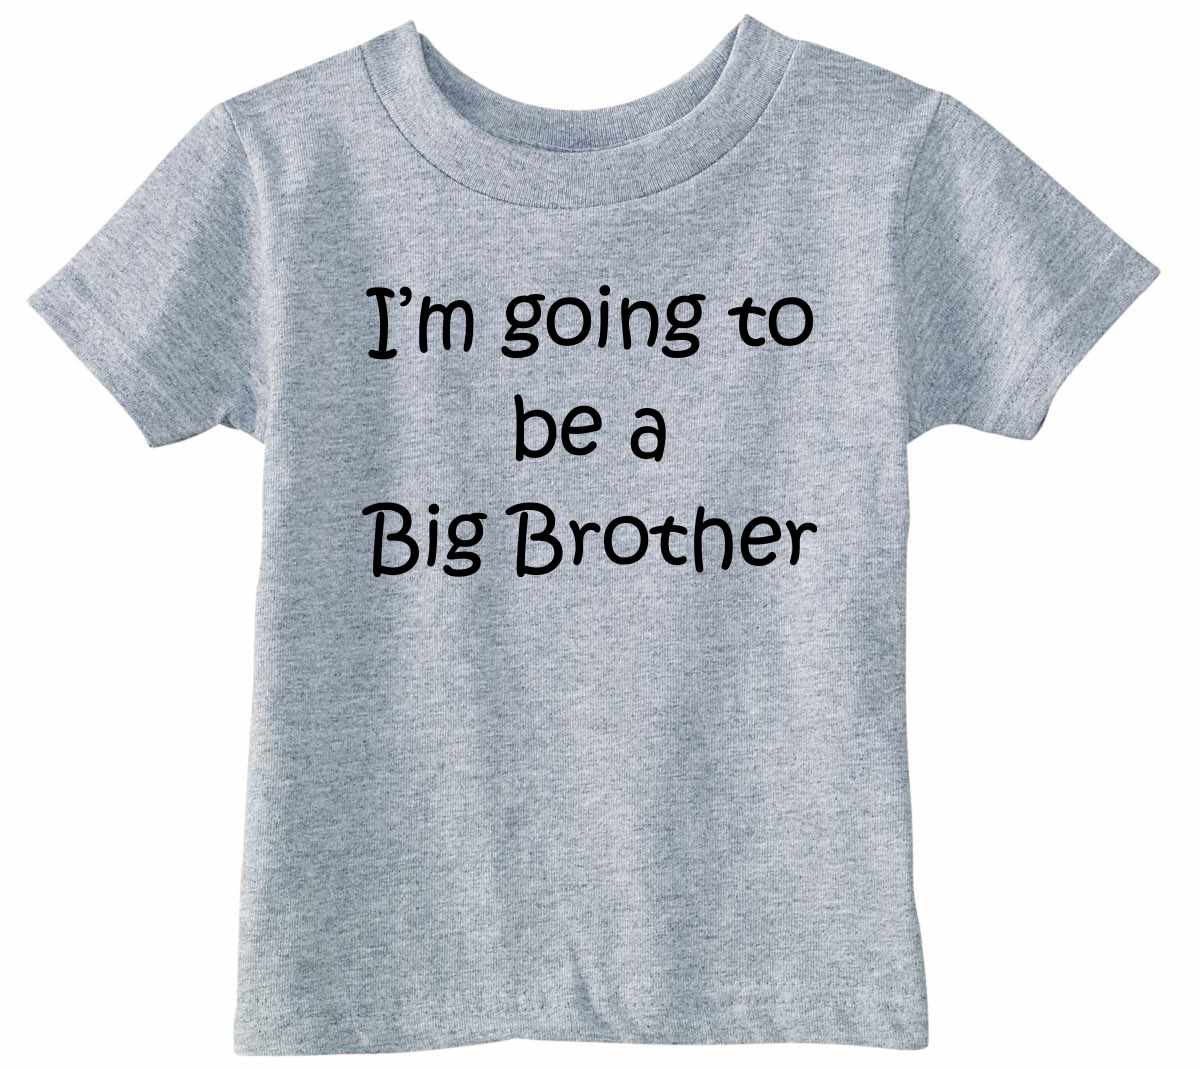 I'M GOING TO BE A BIG BROTHER Infant/Toddler 